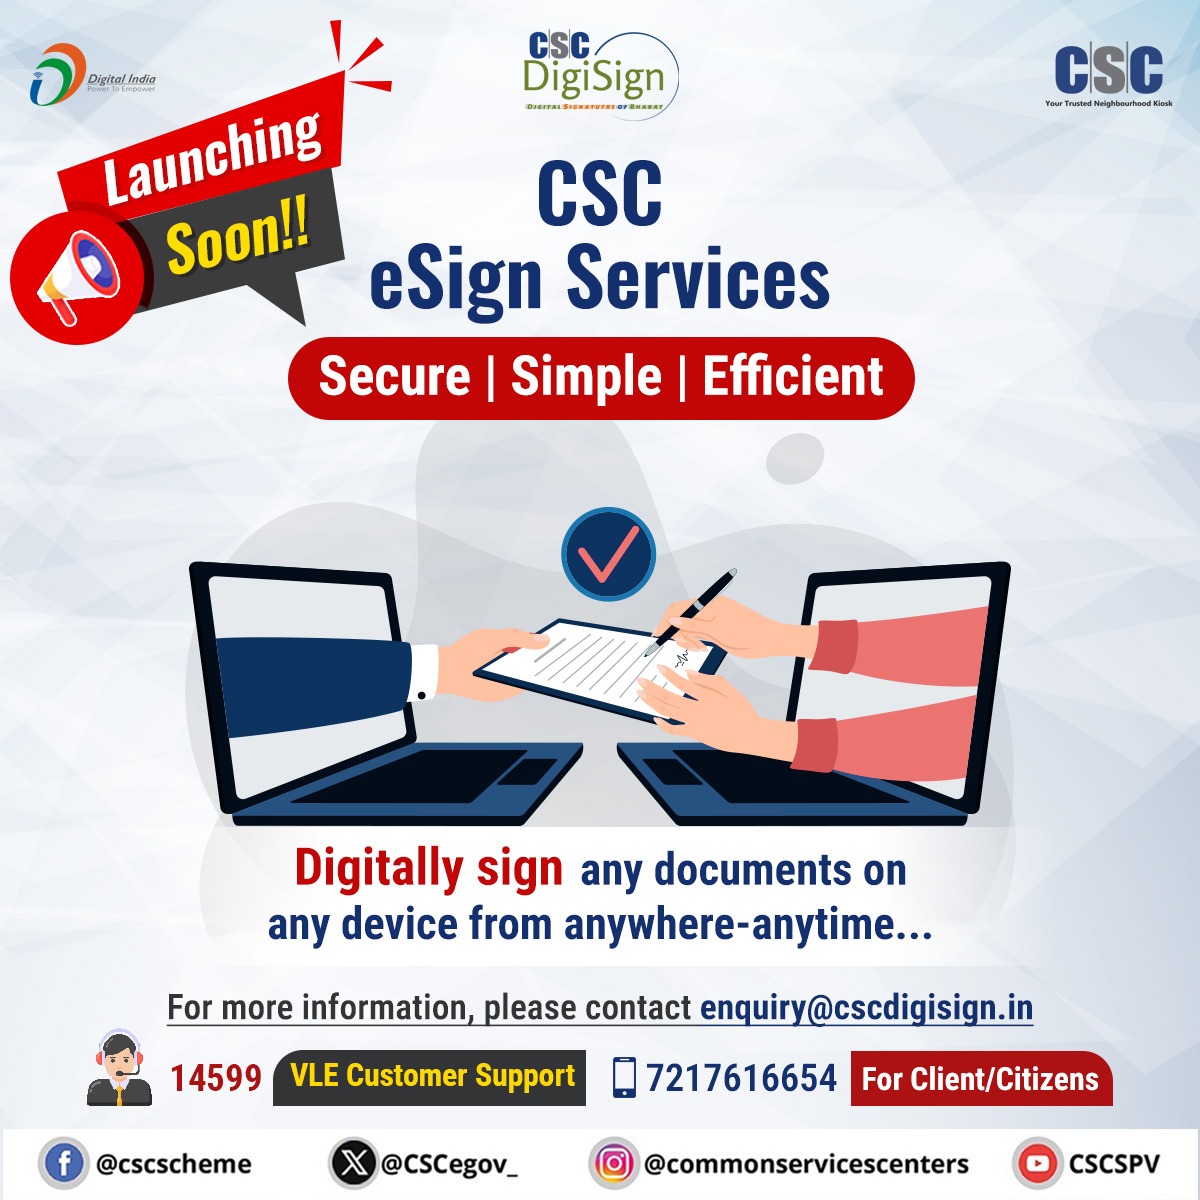 It's Time To Go Paperless & #GoDigital with #CSCeSign Service.... Launching Soon!! Digitally sign any documents on any device from anywhere-anytime... For more information, contact us at enquiry@cscdigisign.in or call us at 14599 (For VLEs) & 7217616654 (For Clients/Citizens).